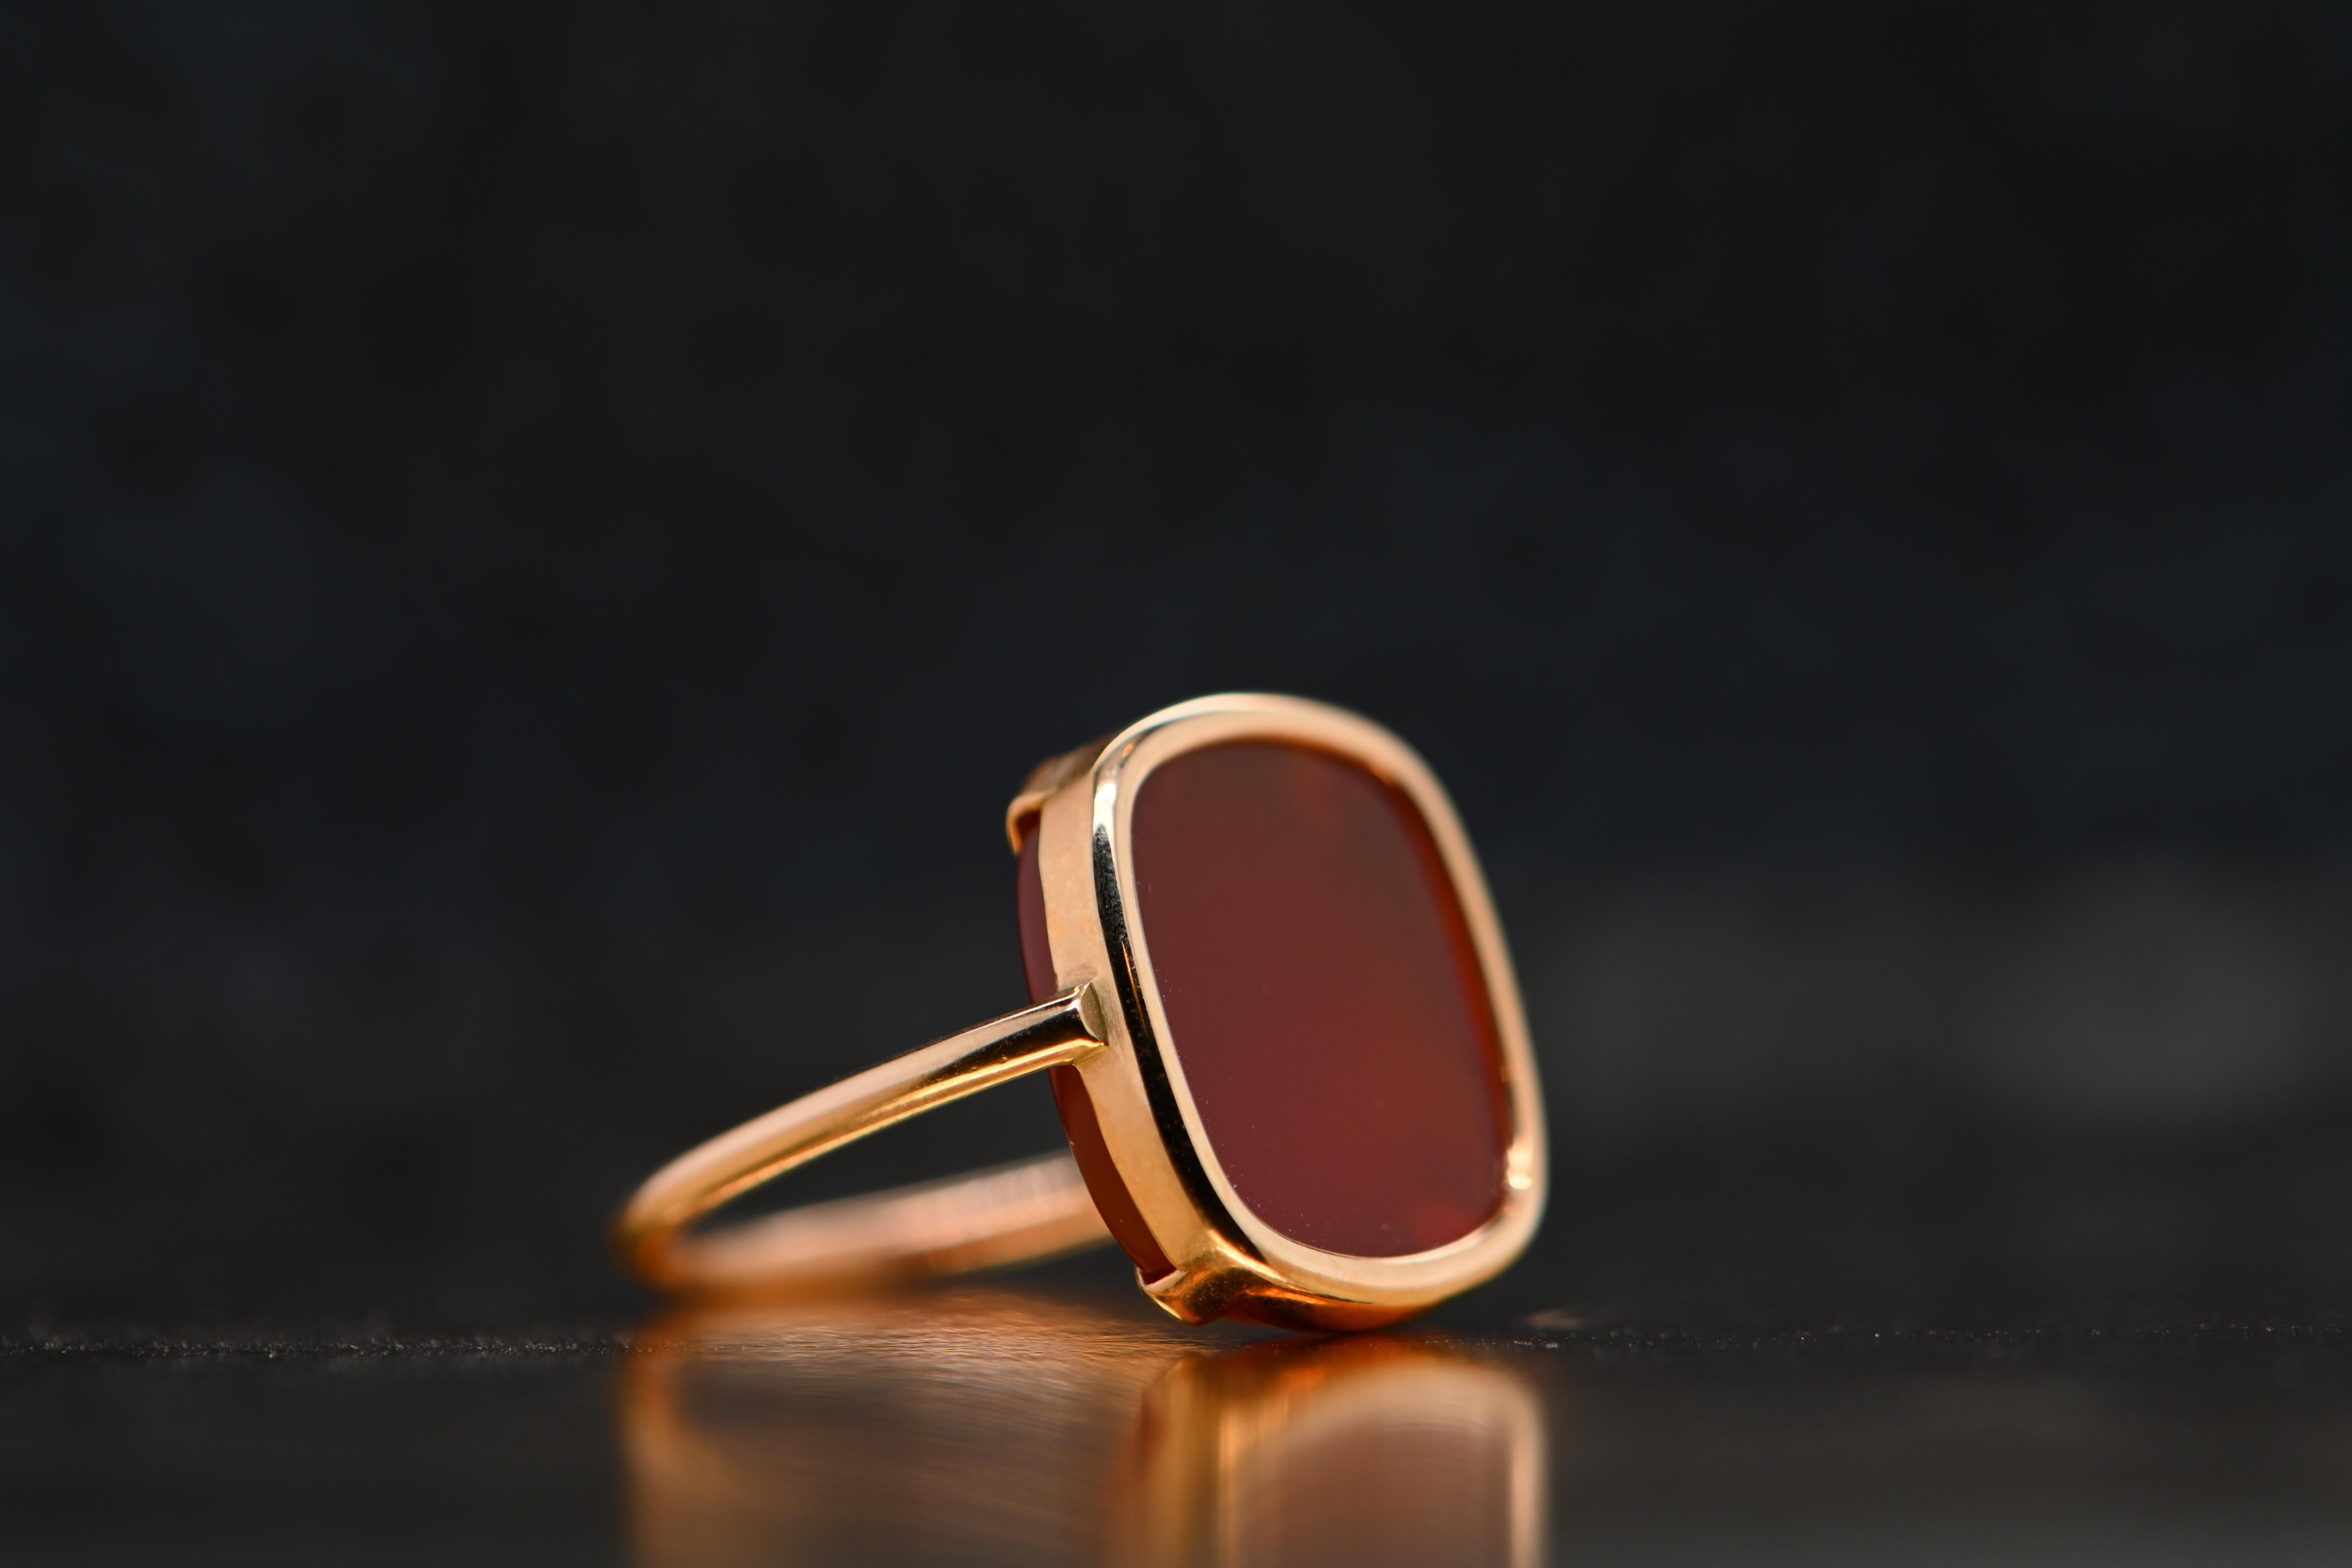 Discover the timeless splendor of an exceptional piece of jewelery with this magnificent 18 carat pink gold ring. Designed with passion and incomparable craftsmanship, this ring embodies elegance and finesse in their purest form. Its setting is